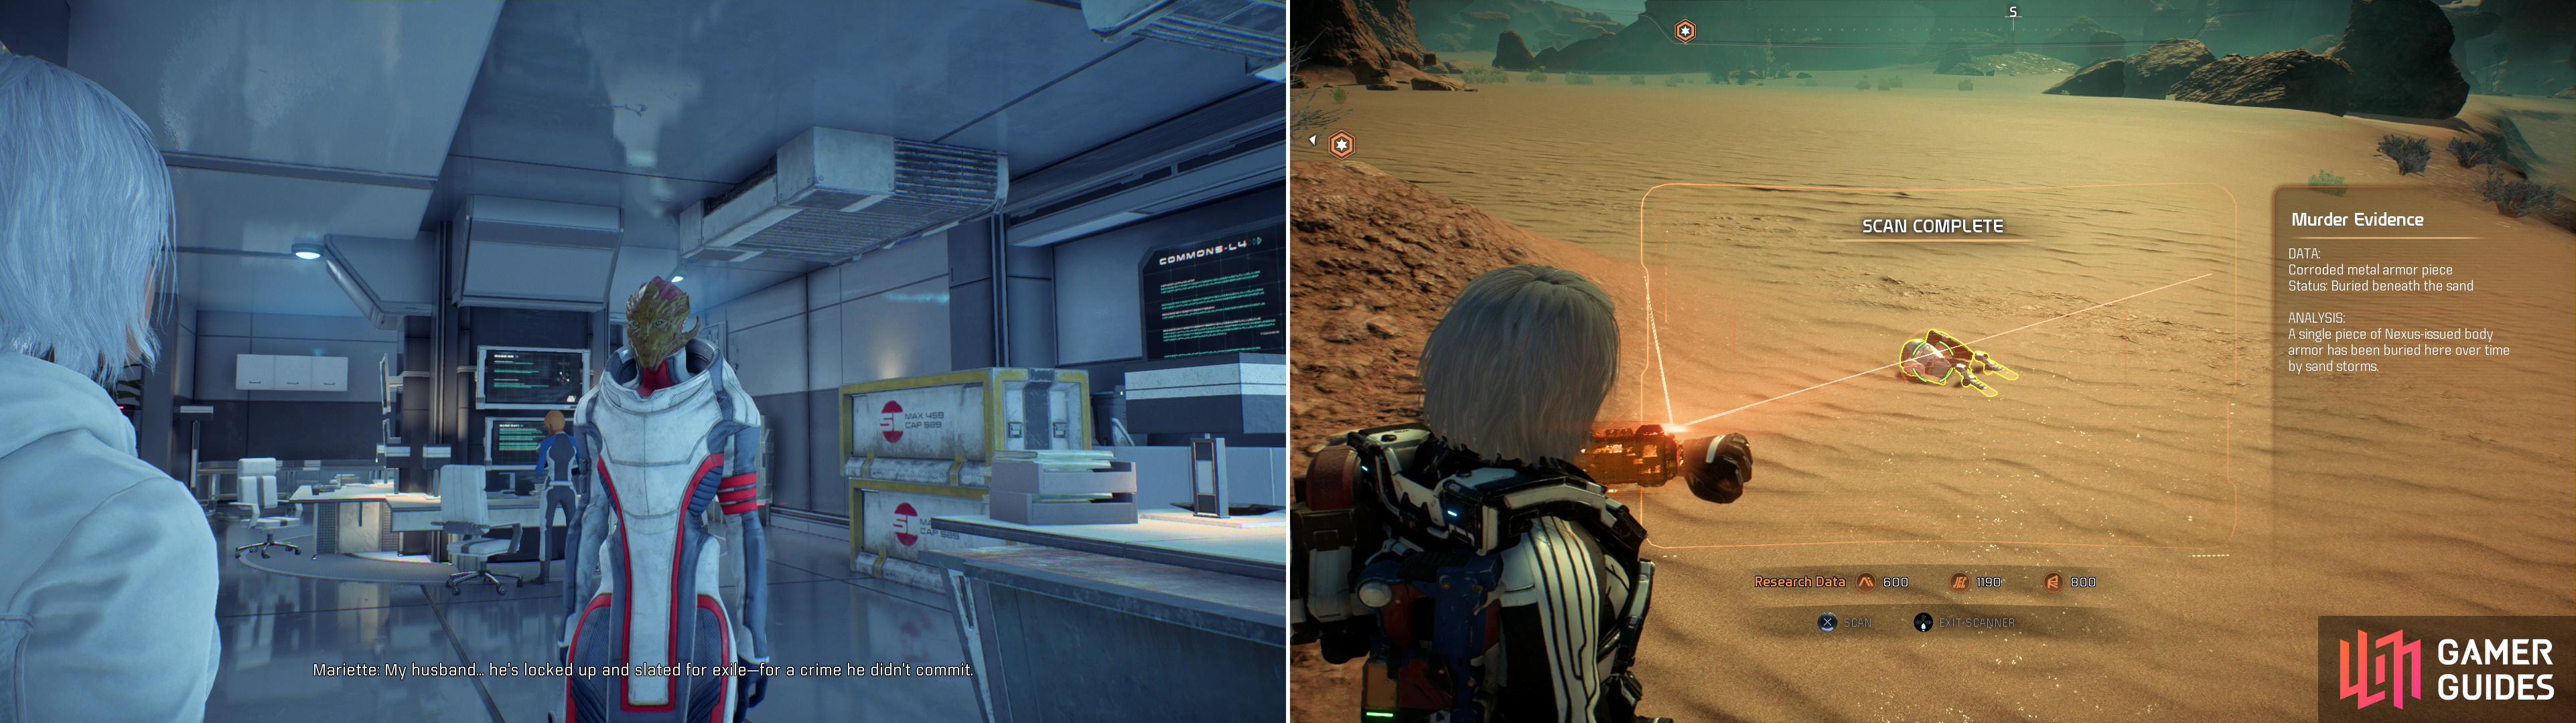 Talk to Mariette on the Nexus to learn that her husband is in dire legal straits (left). Follow up on the information you procured on the Nexus by returning to Eos and scanning murder evidence (right).